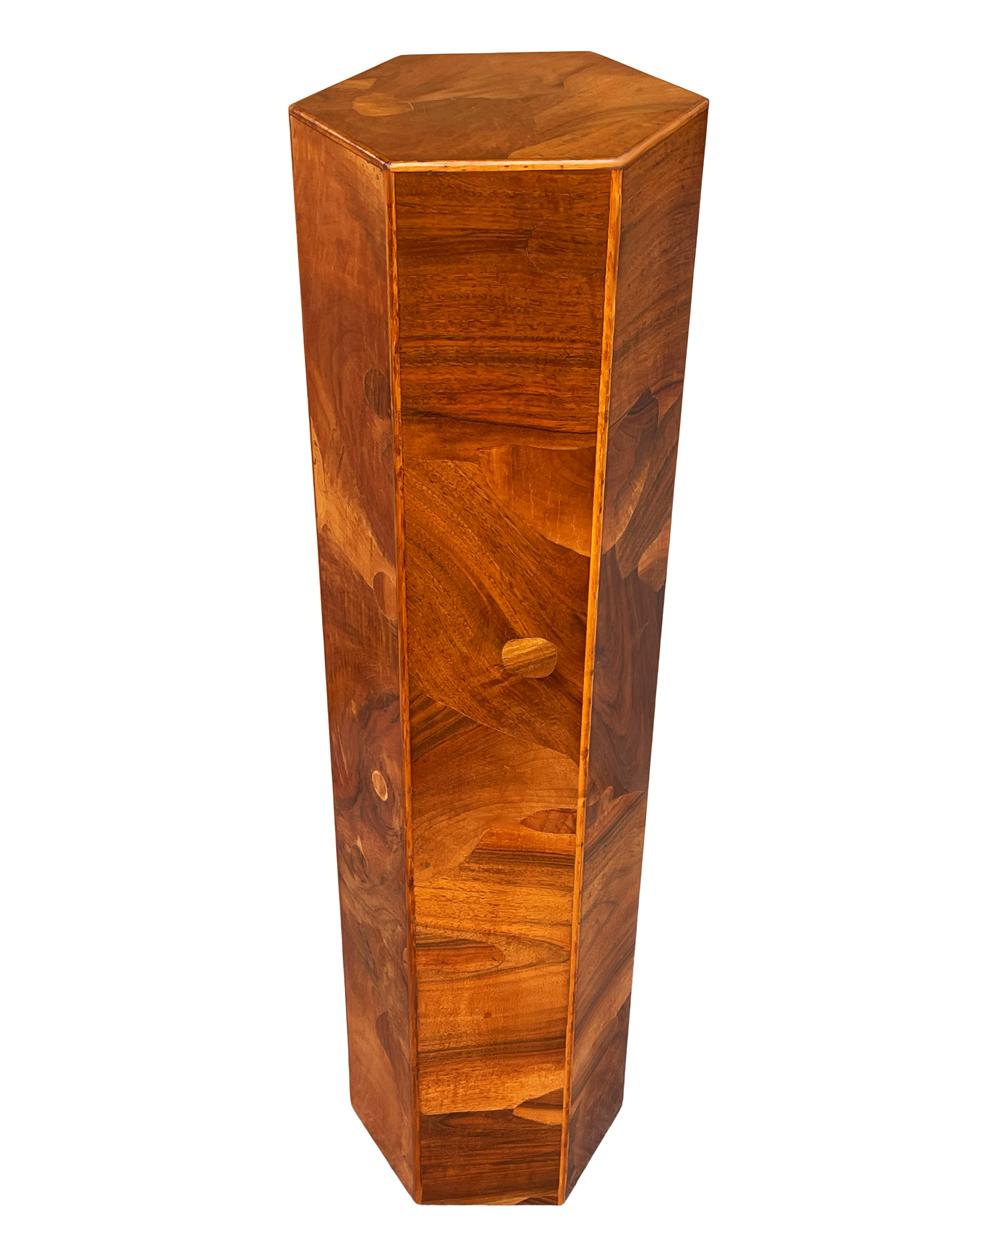 A simple and elegant pedestal made in Italy circa 1960s. It consists of different burl wood veneers on a hexagonal form. Very clean and ready for use.